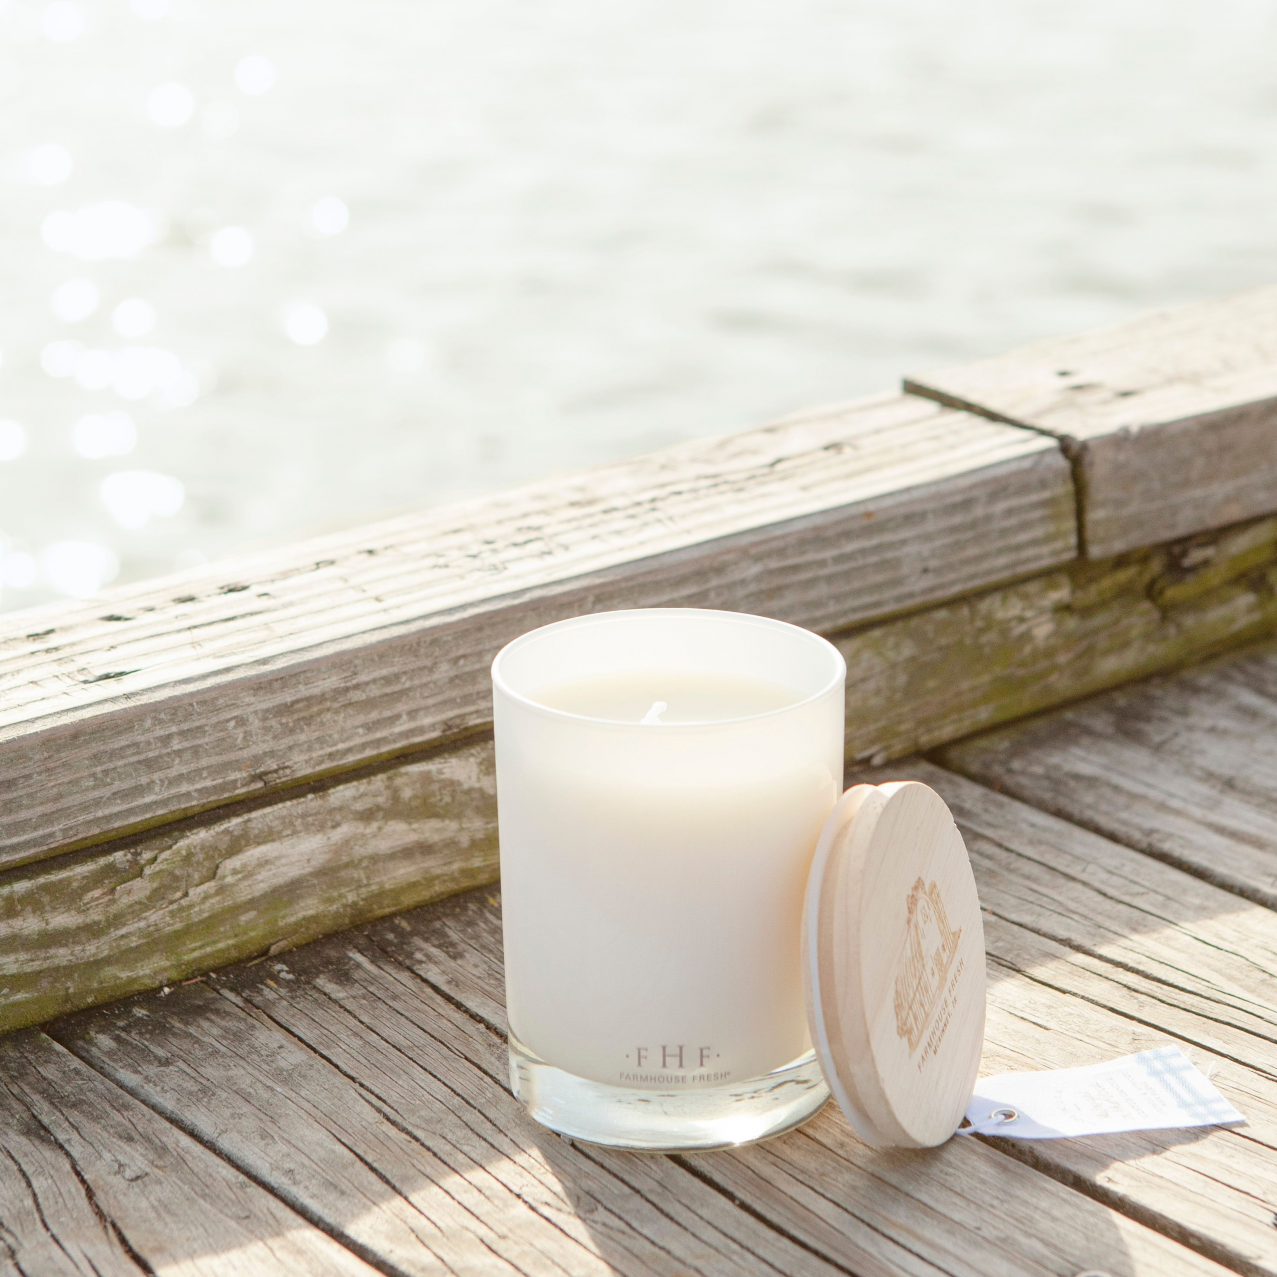 Midnight on the Dock Candle with Wooden Lid